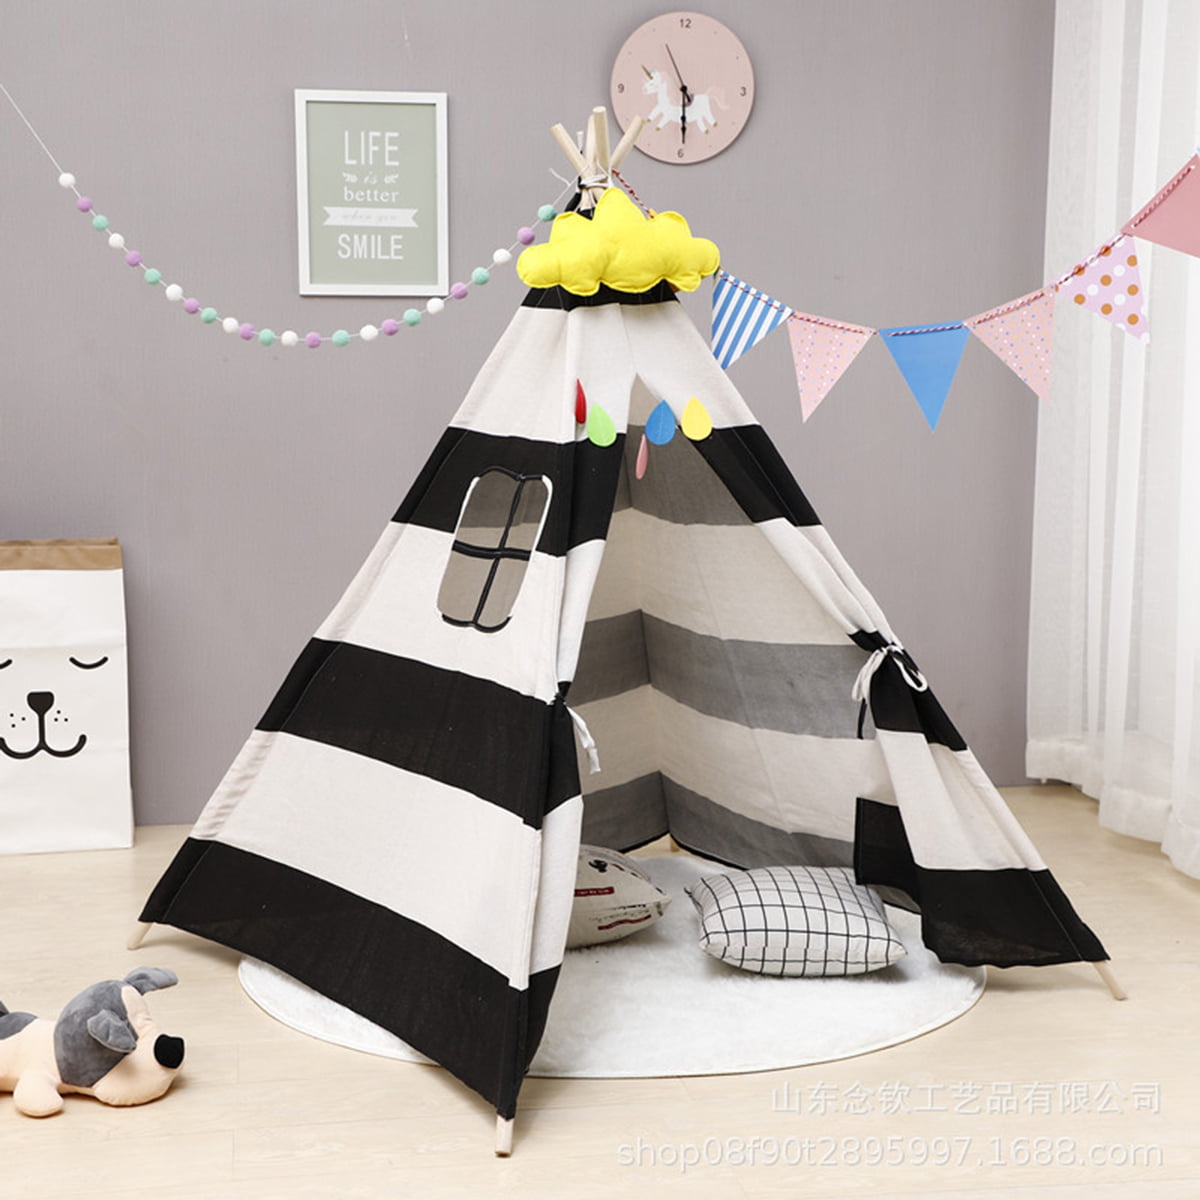 Teepee Tent for Kids Tepee Play Tent Indoor and Outdoor Portable Childrens Pop Up Tee Pee Playhouse Fort Play Tent for Boy and Girls Carry Case Included 